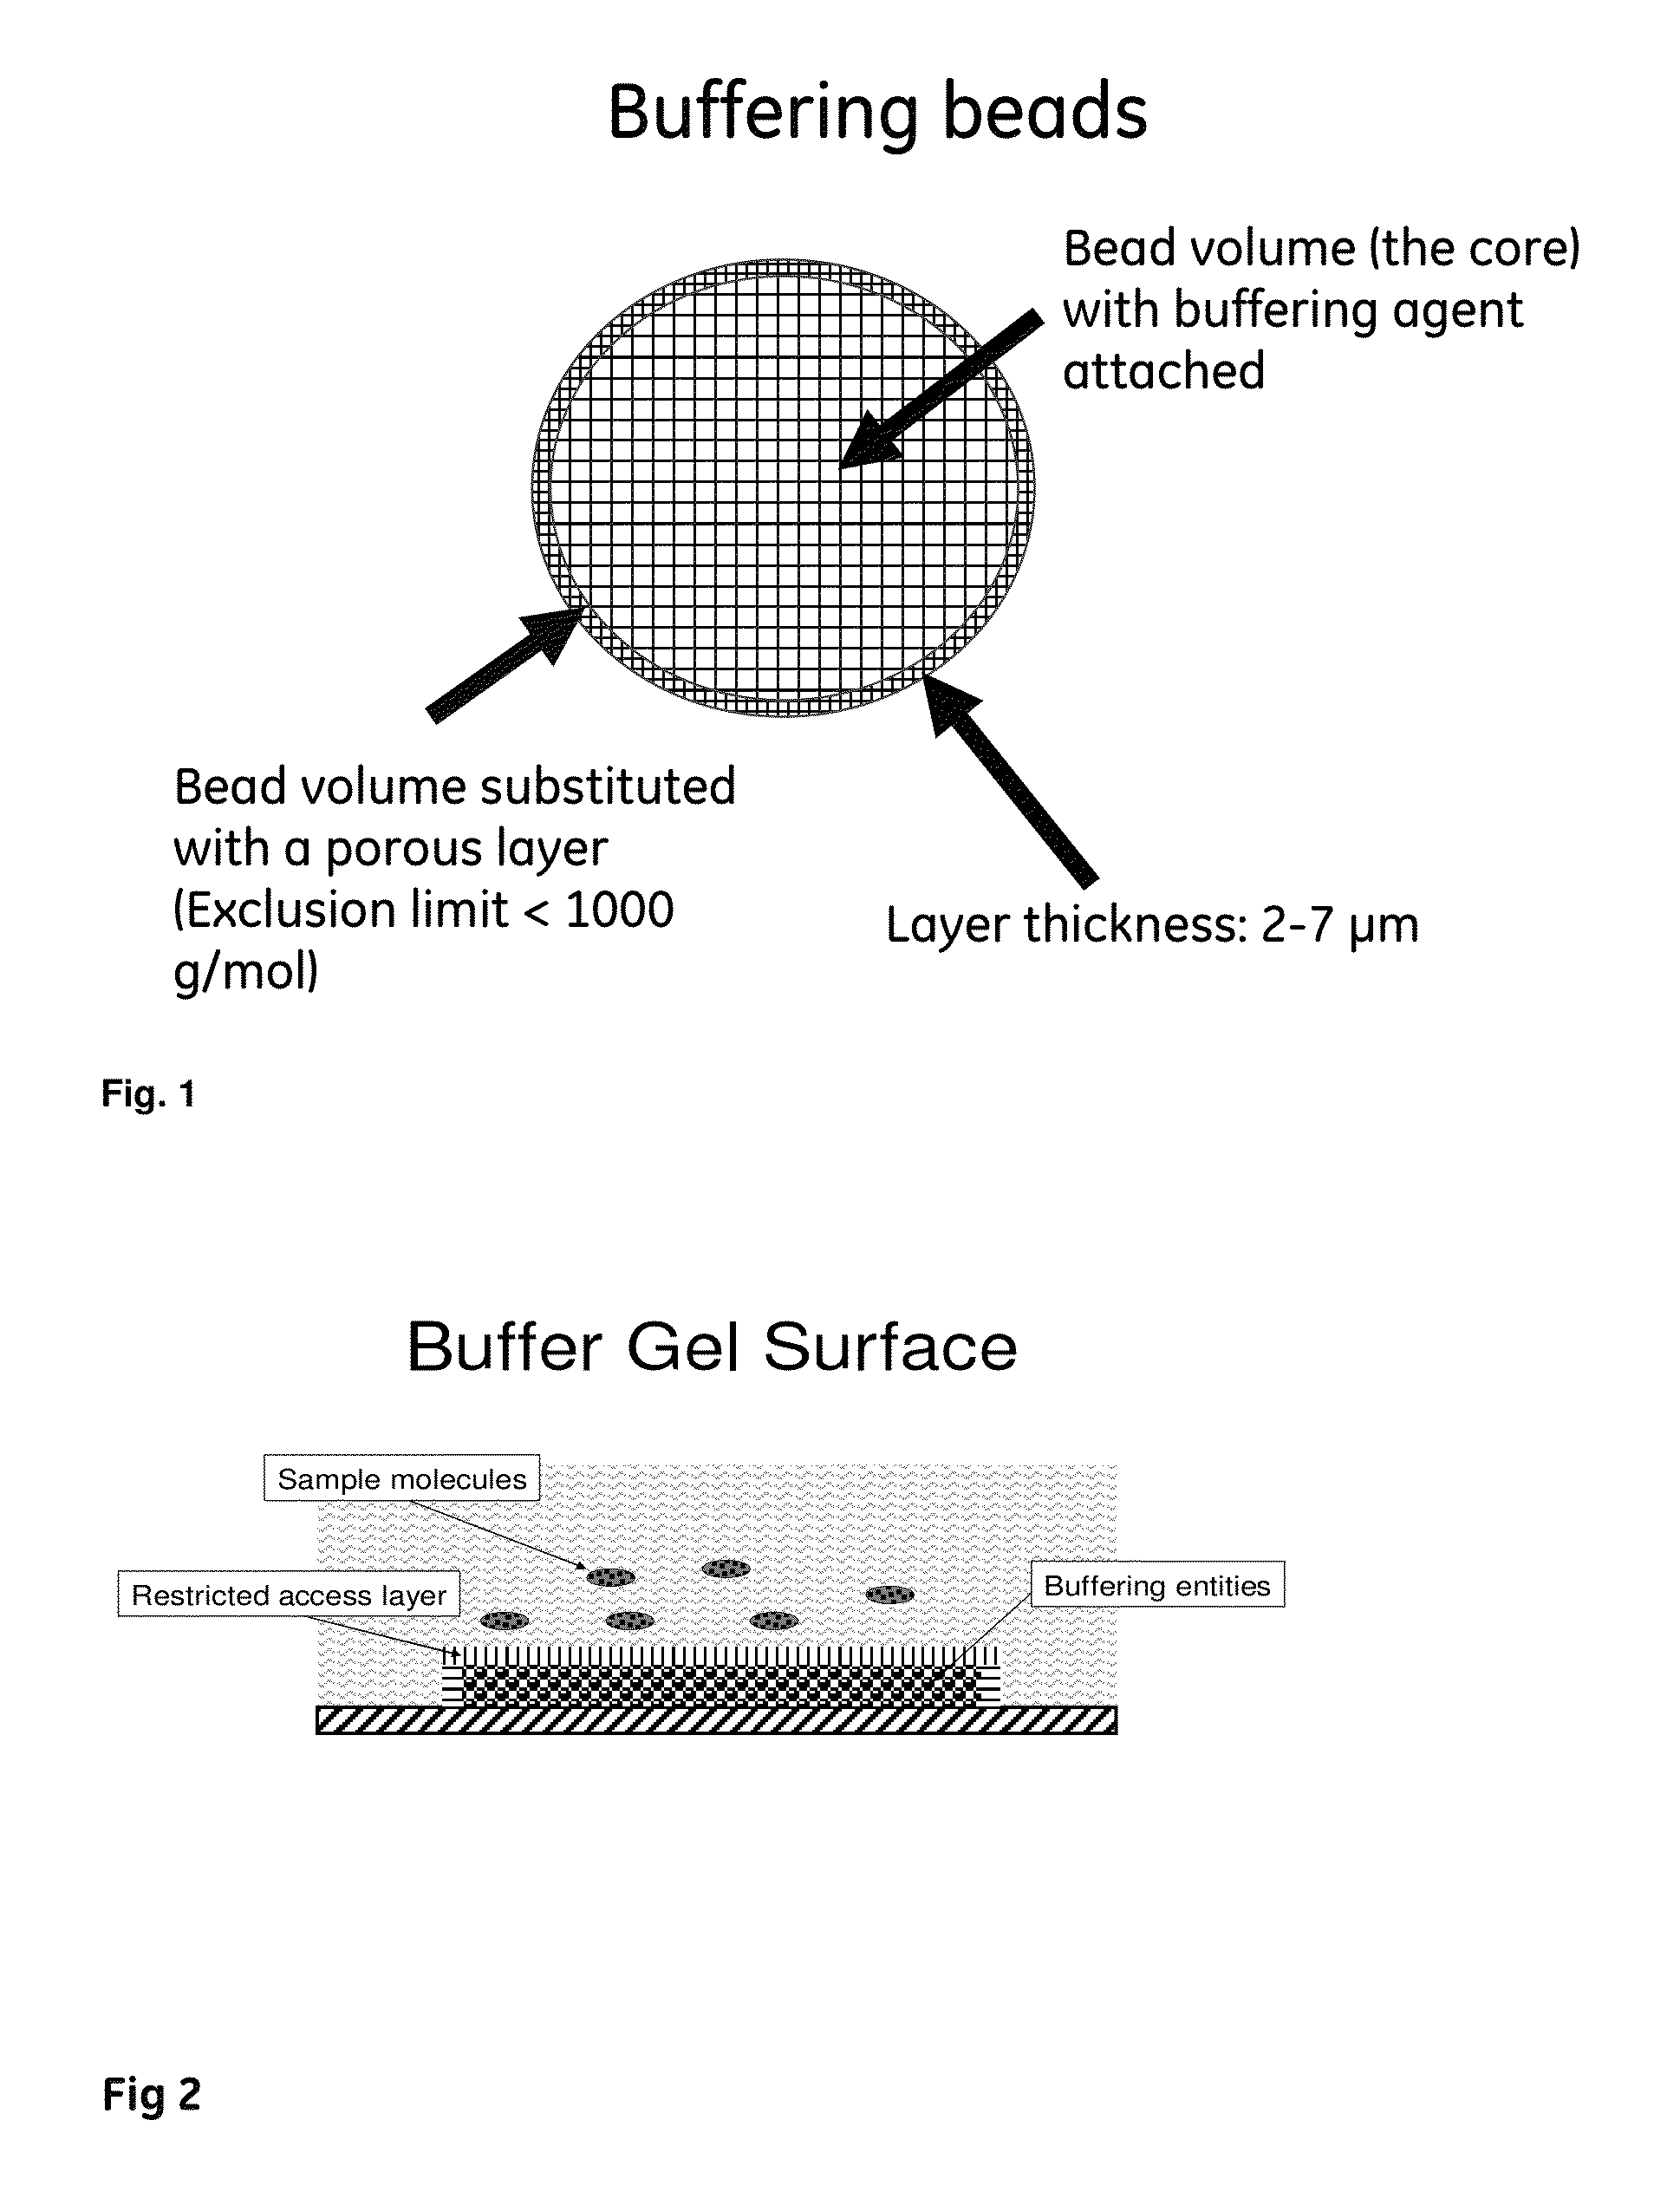 Buffering compositions enclosed in a size exclusion matrix